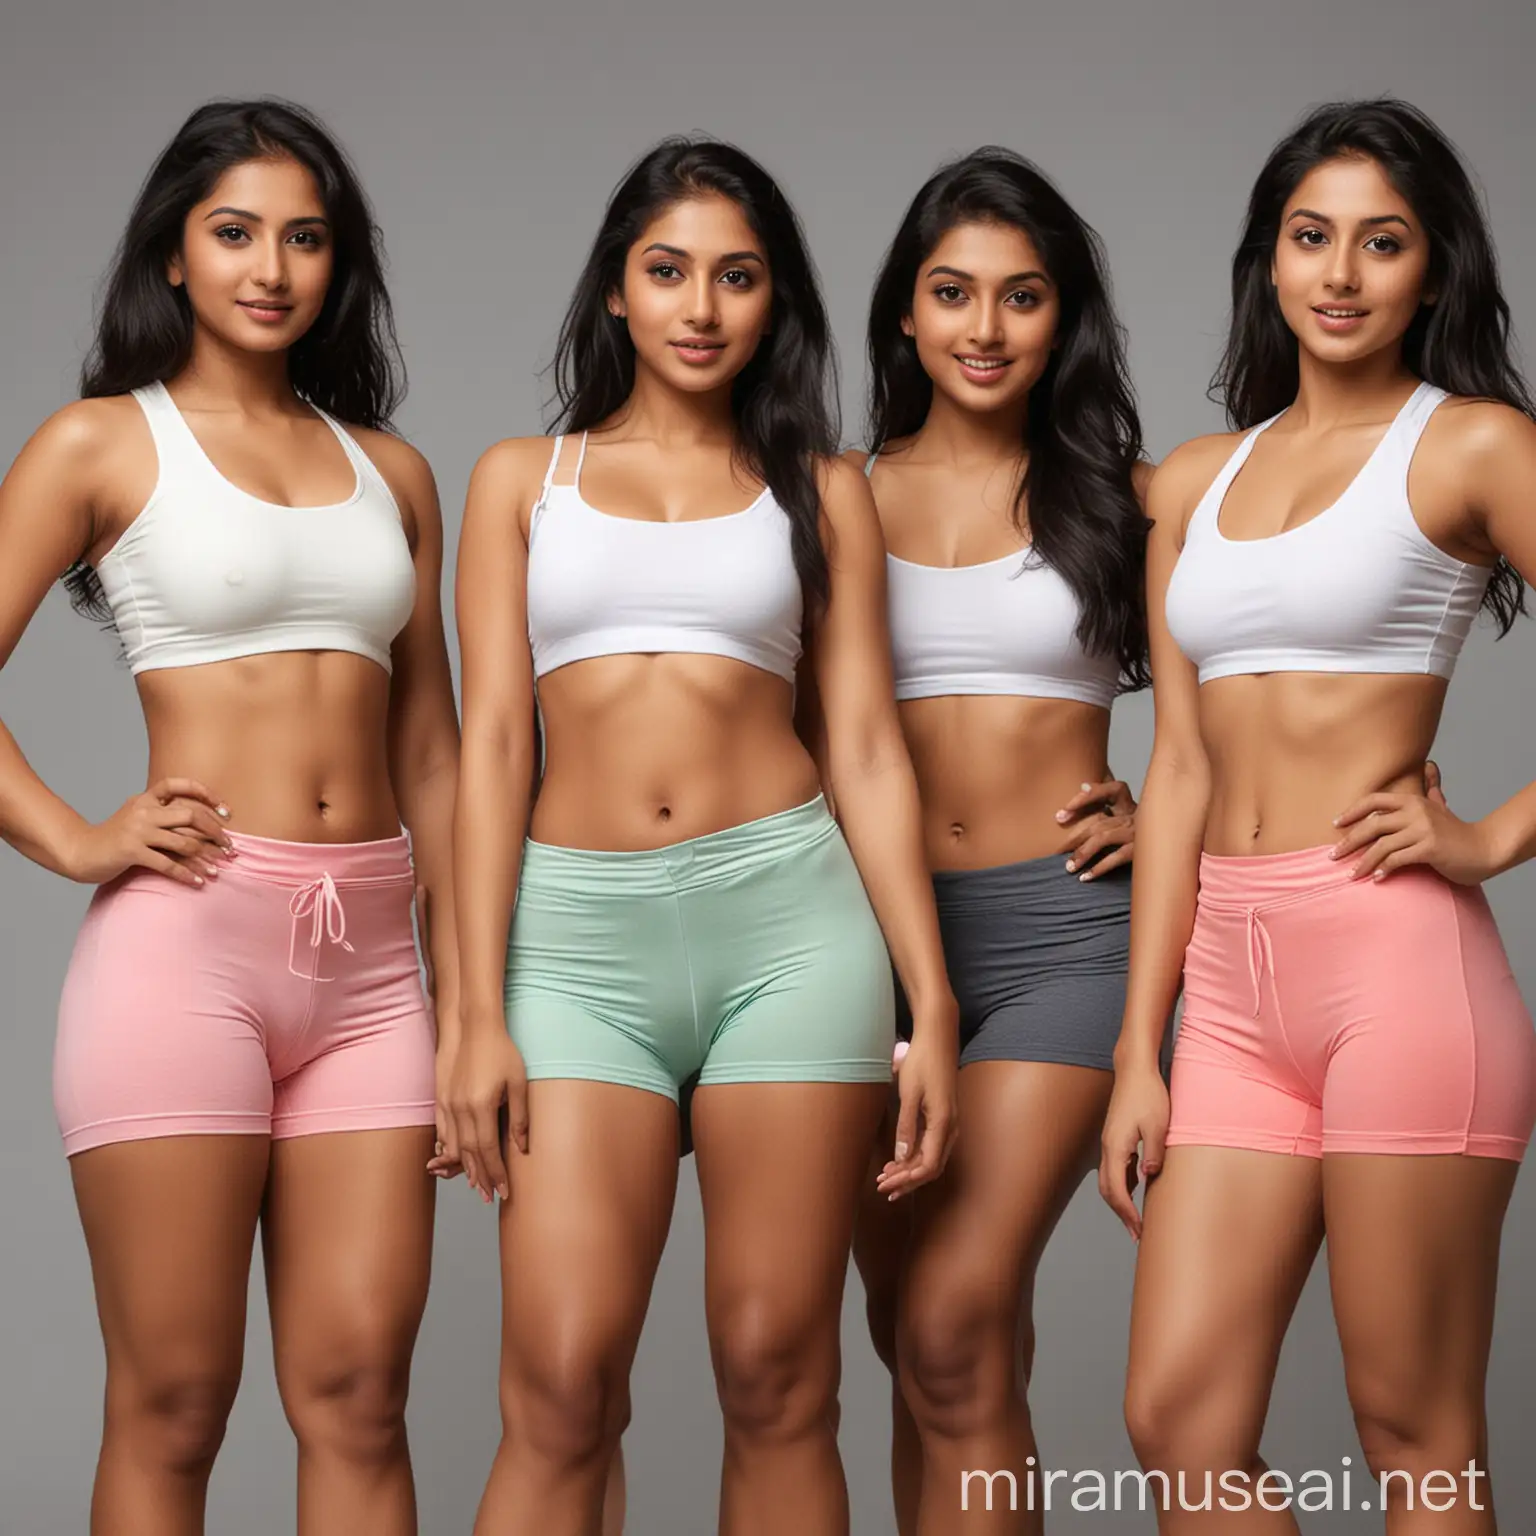 Stylish Indian Women in Vibrant Cotton Cycling Shorts